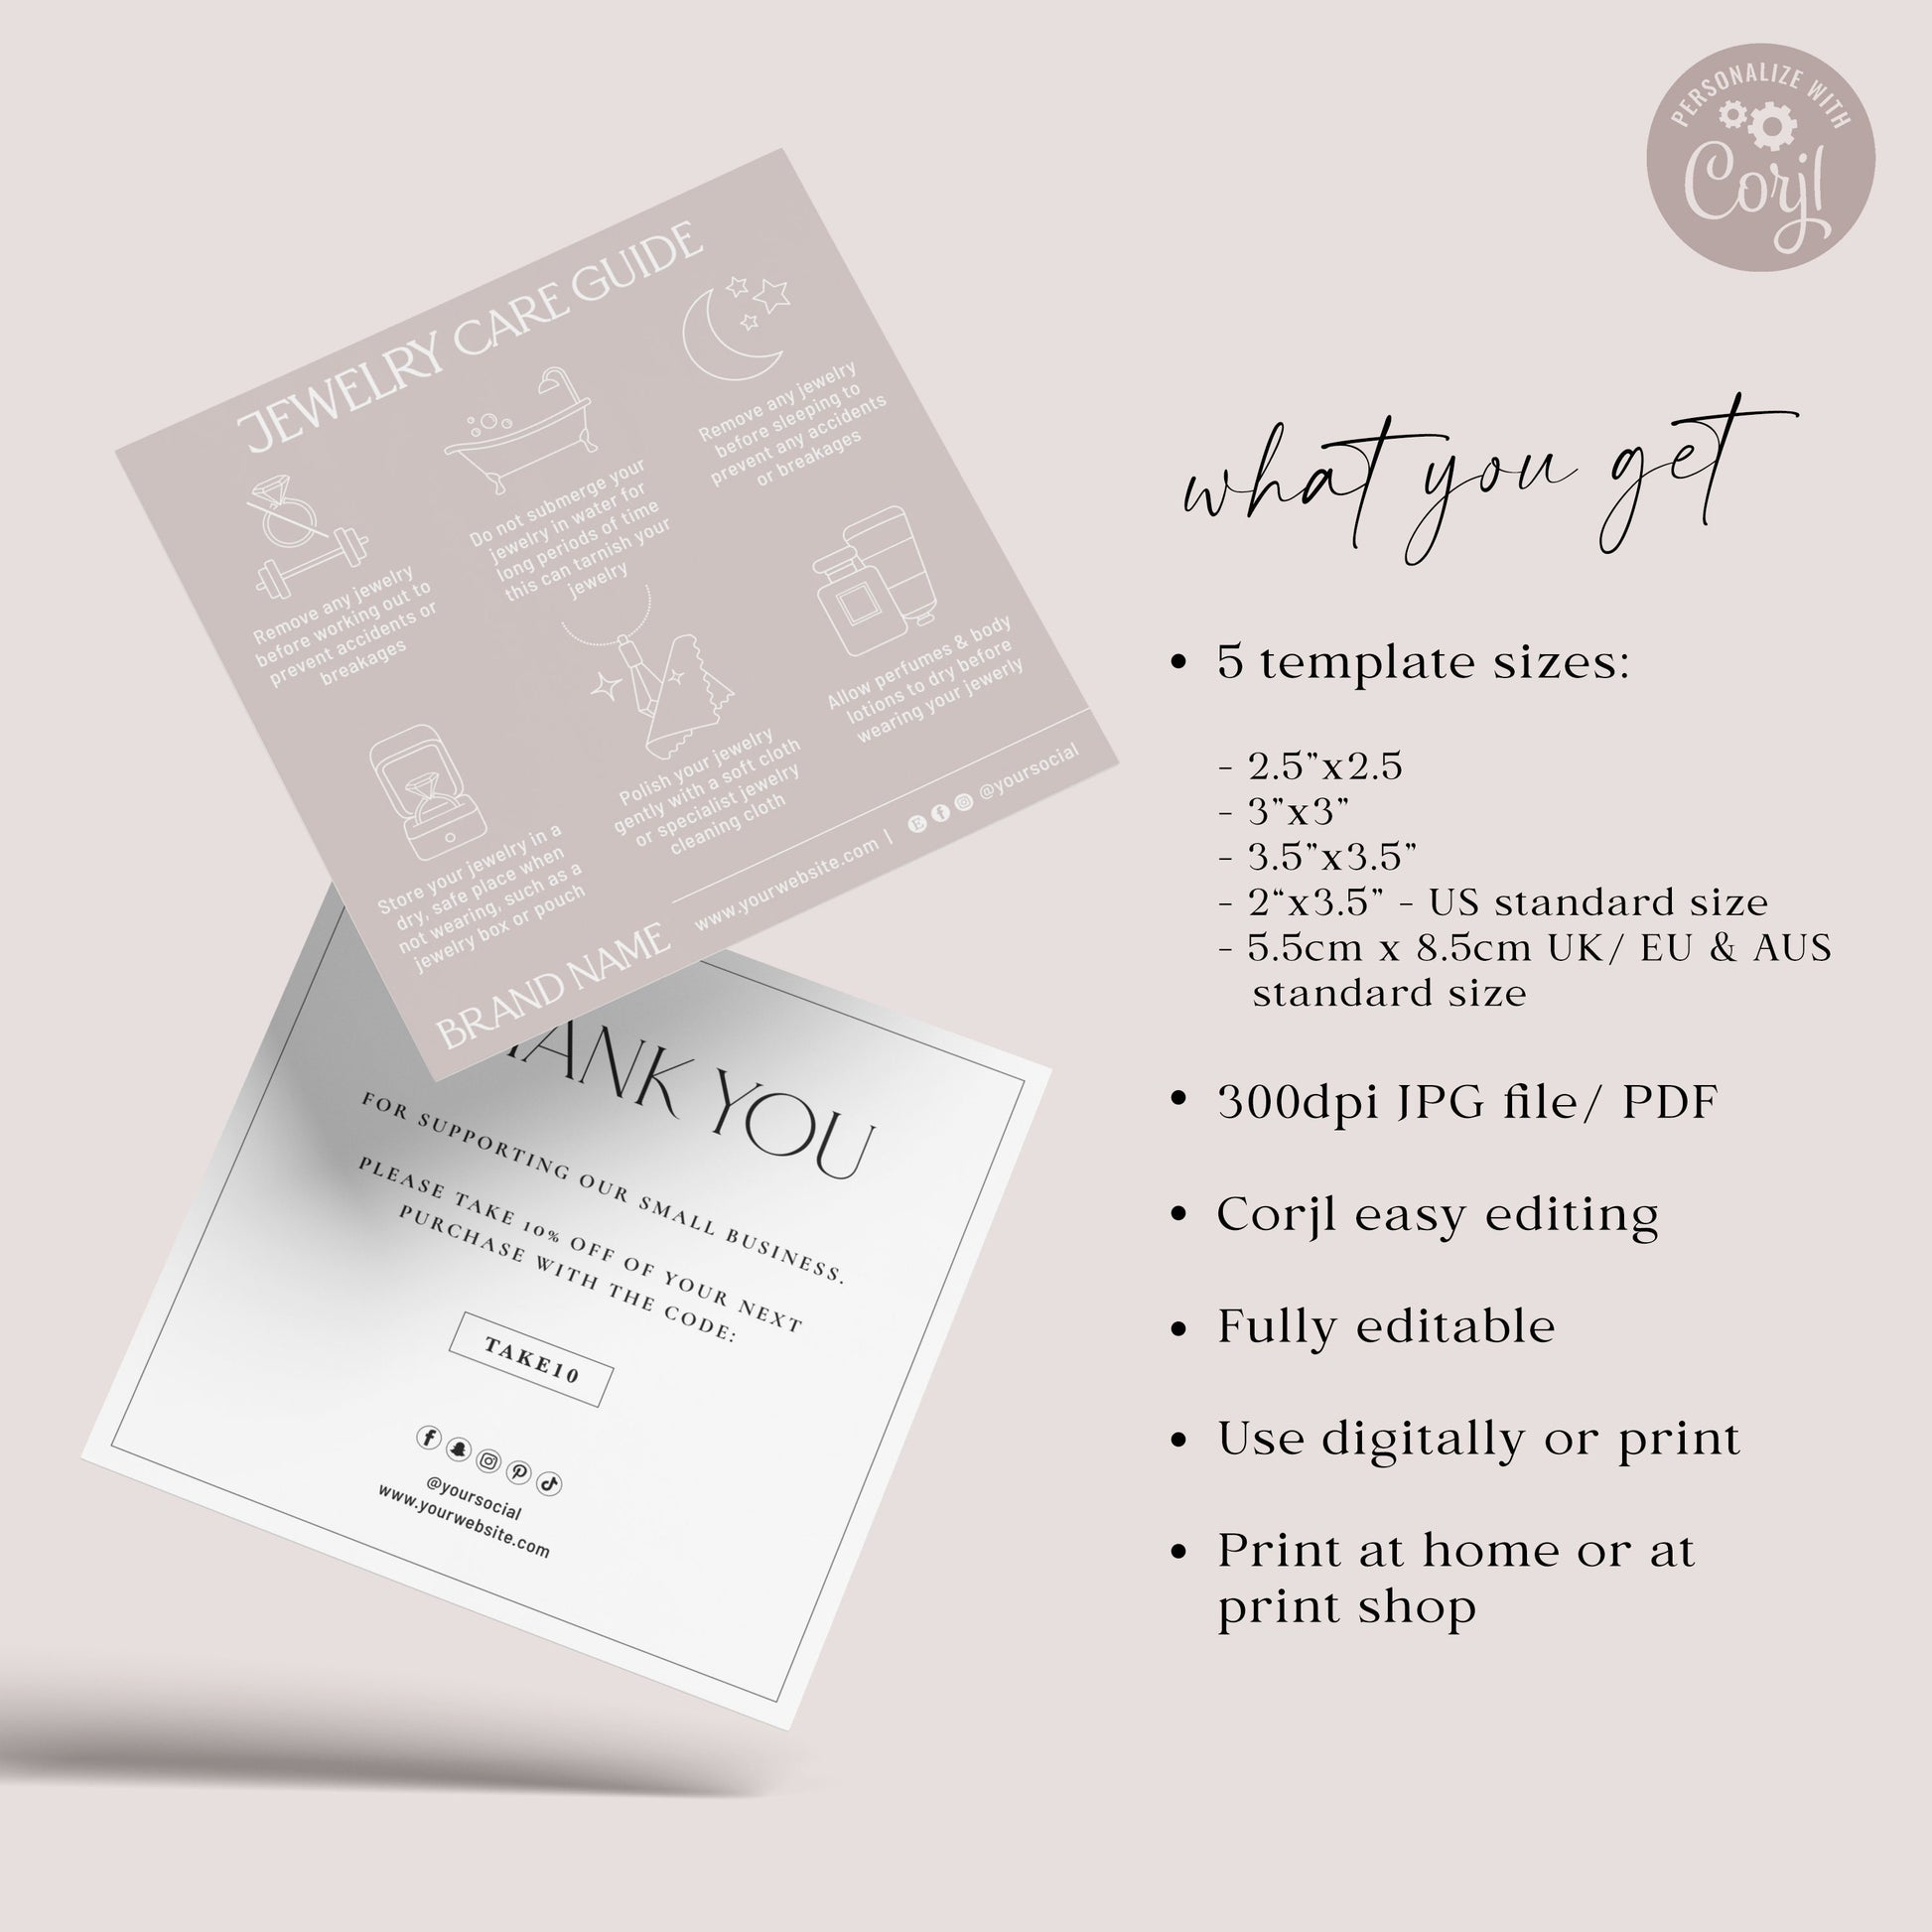 Jewelry Care Guide Editable Template, 5 Sizes Minimalist DIY Edit Jewellery Care Guide Card, Printable Square Care Instructions SD-002